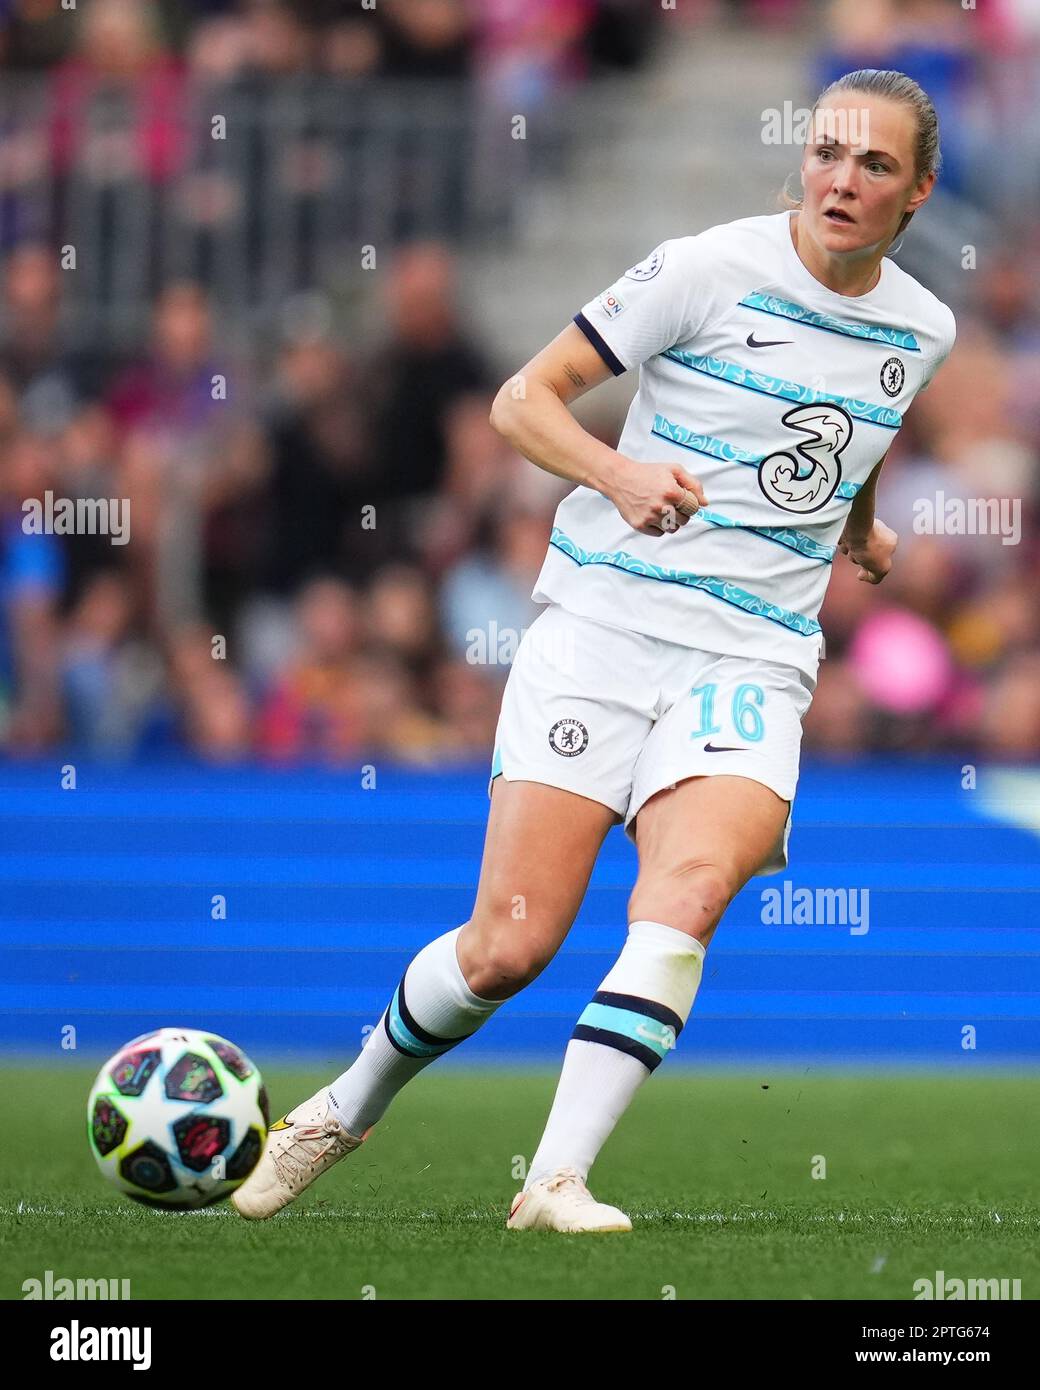 Magdalena Eriksson of Chelsea FC during the UEFA Womens Champions League match, Semi-Finals, 2nd leg between FC Barcelona v Chelsea FC played at Spotify Camp Nou Stadium on April 27, 2023 in Barcelona, Spain. (Photo by Colas Buera / PRESSIN) Stock Photo